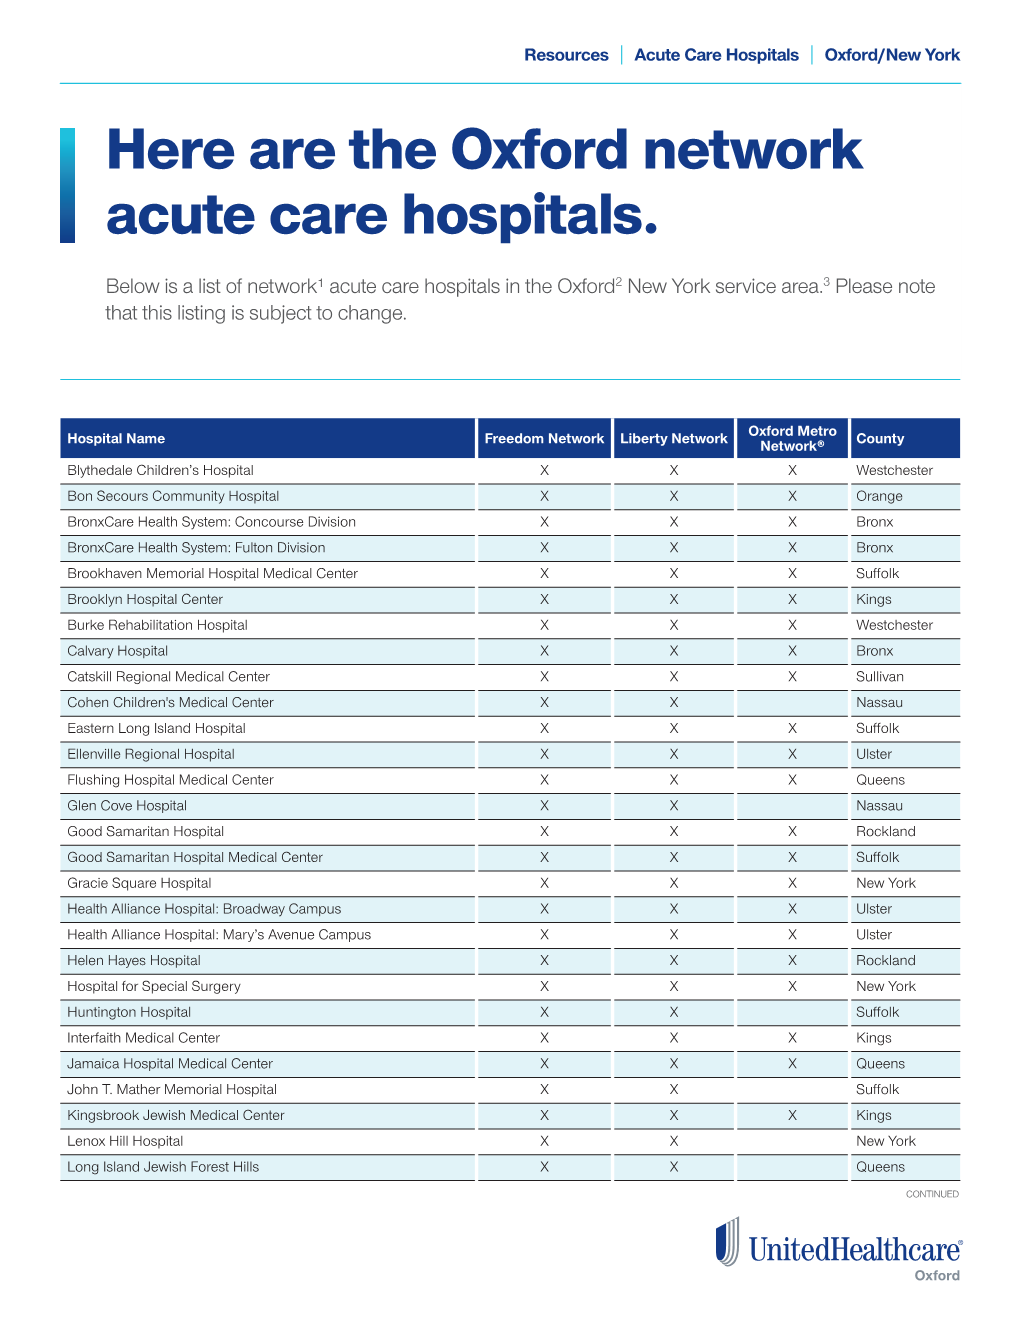 Here Are the Oxford Network Acute Care Hospitals